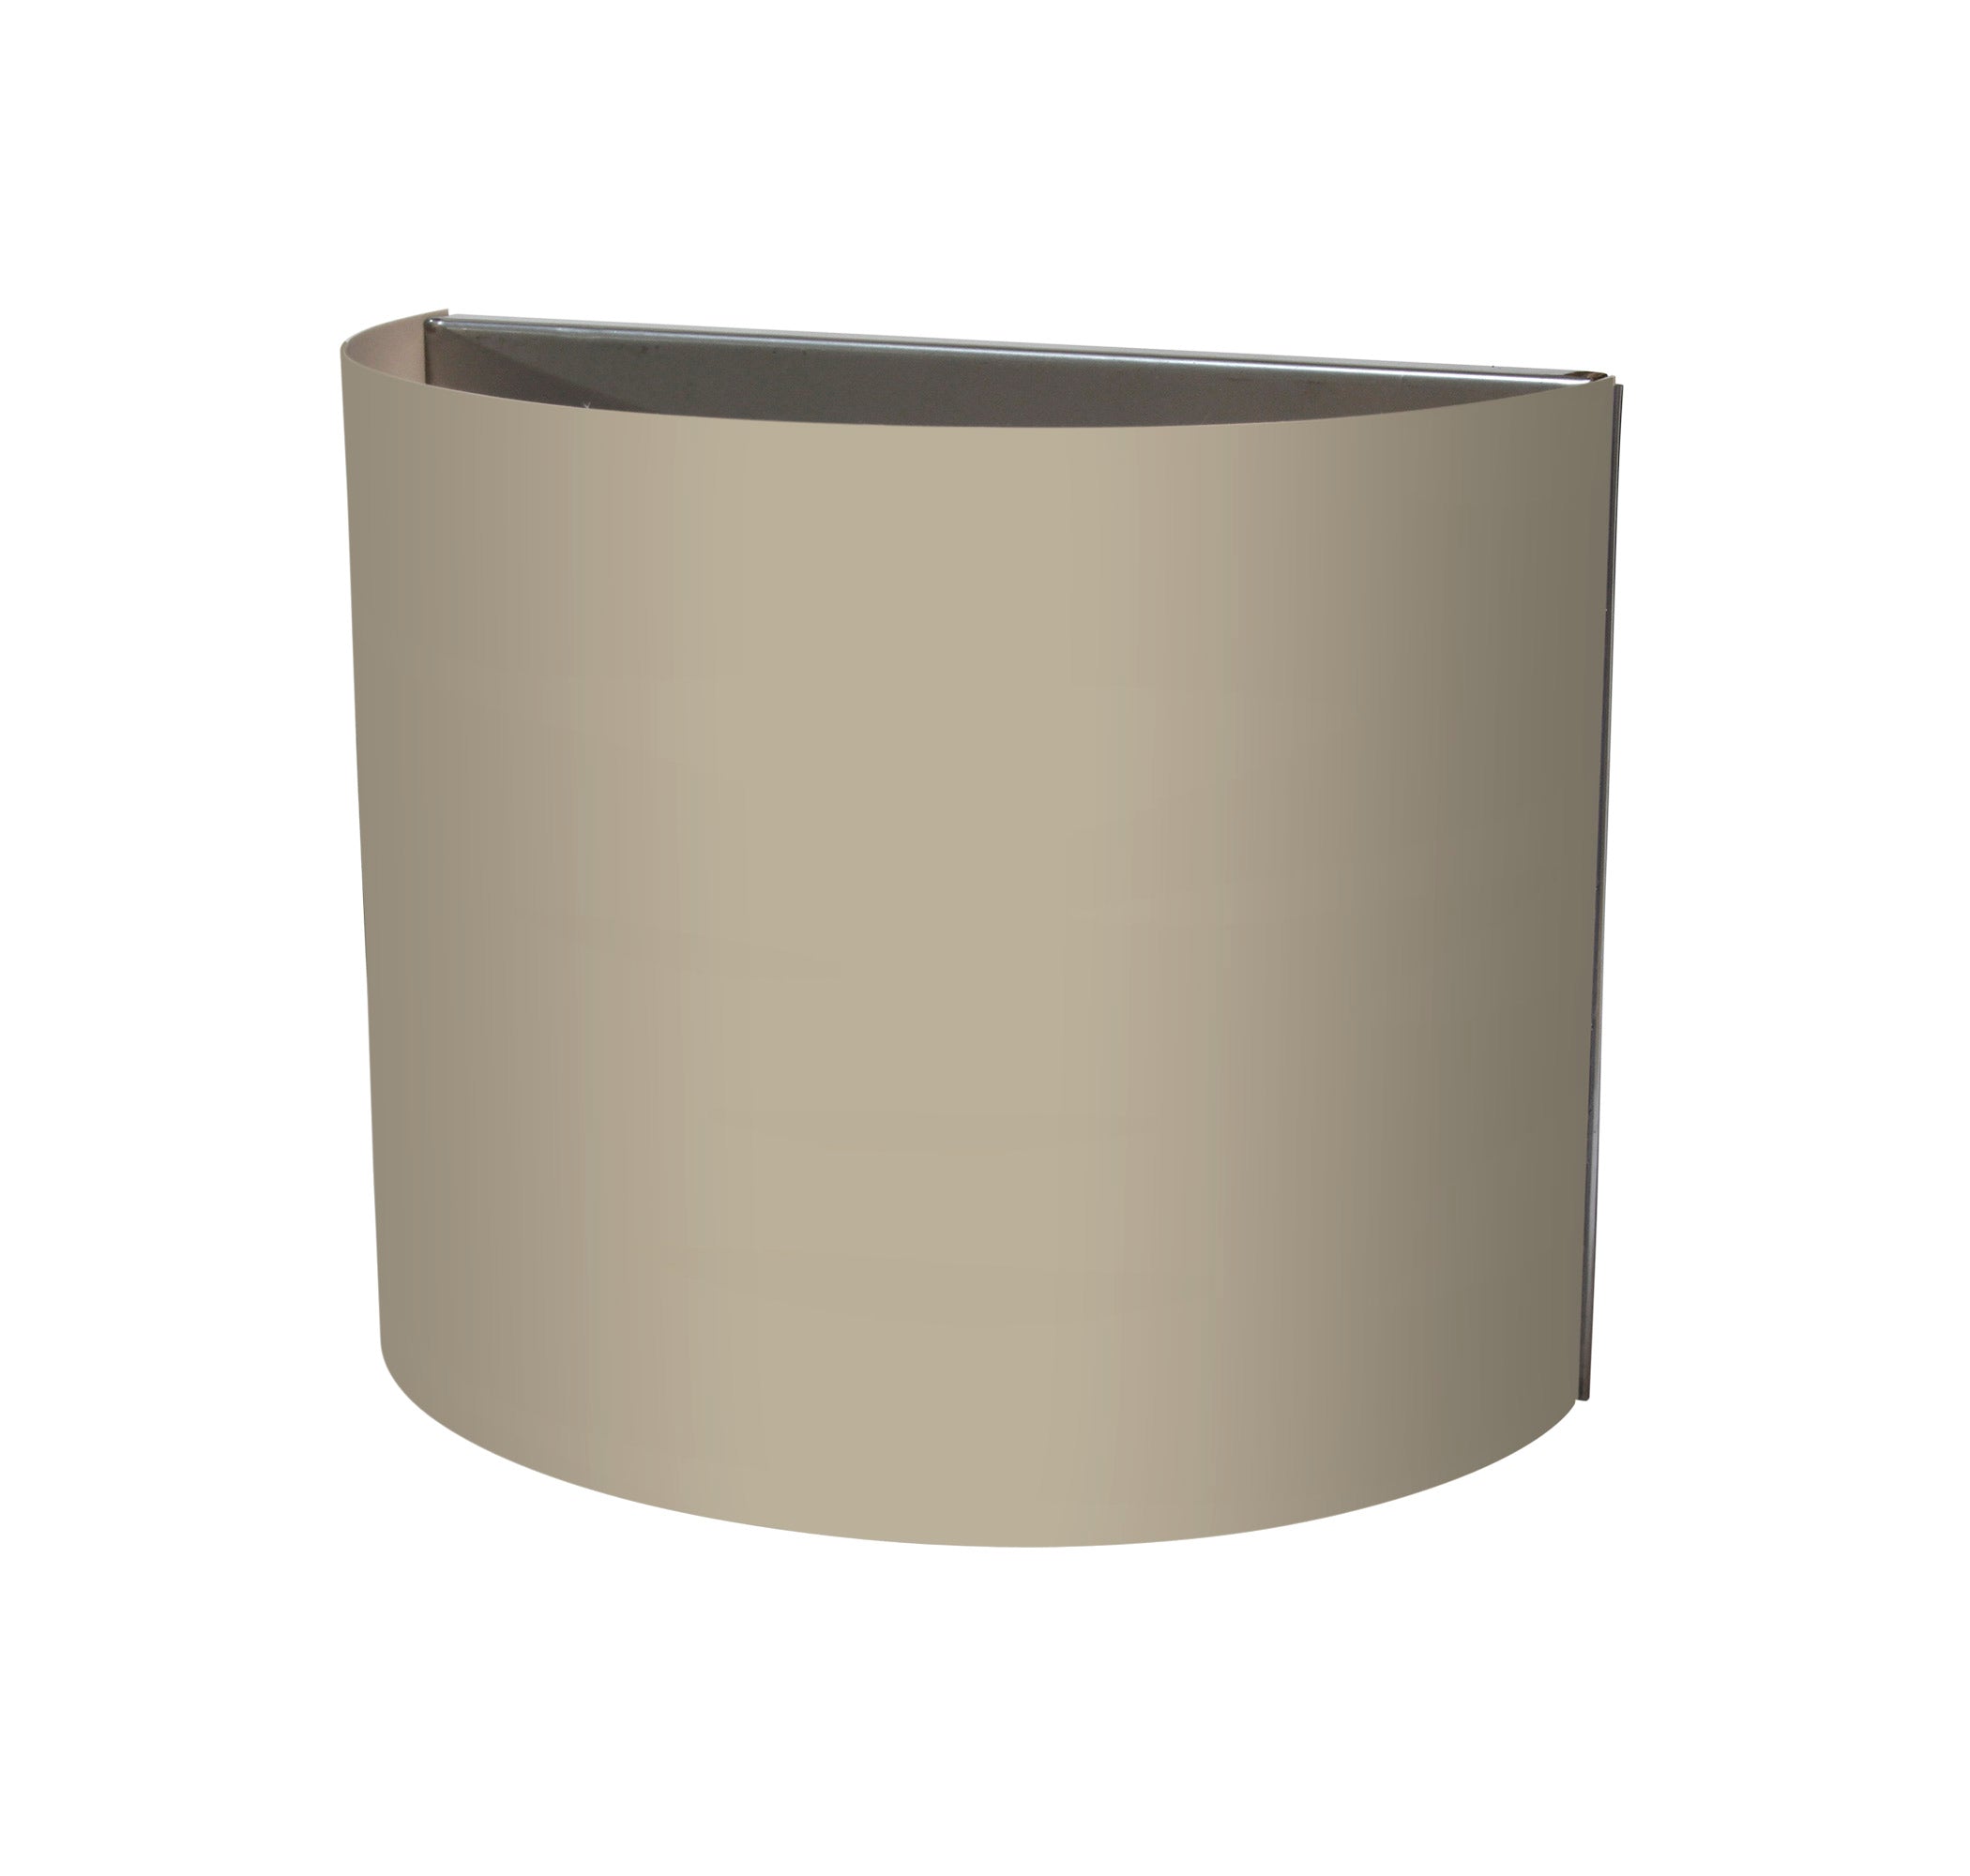 The Vita Wall Sconce from Seascape Fixtures in linen, tan color.